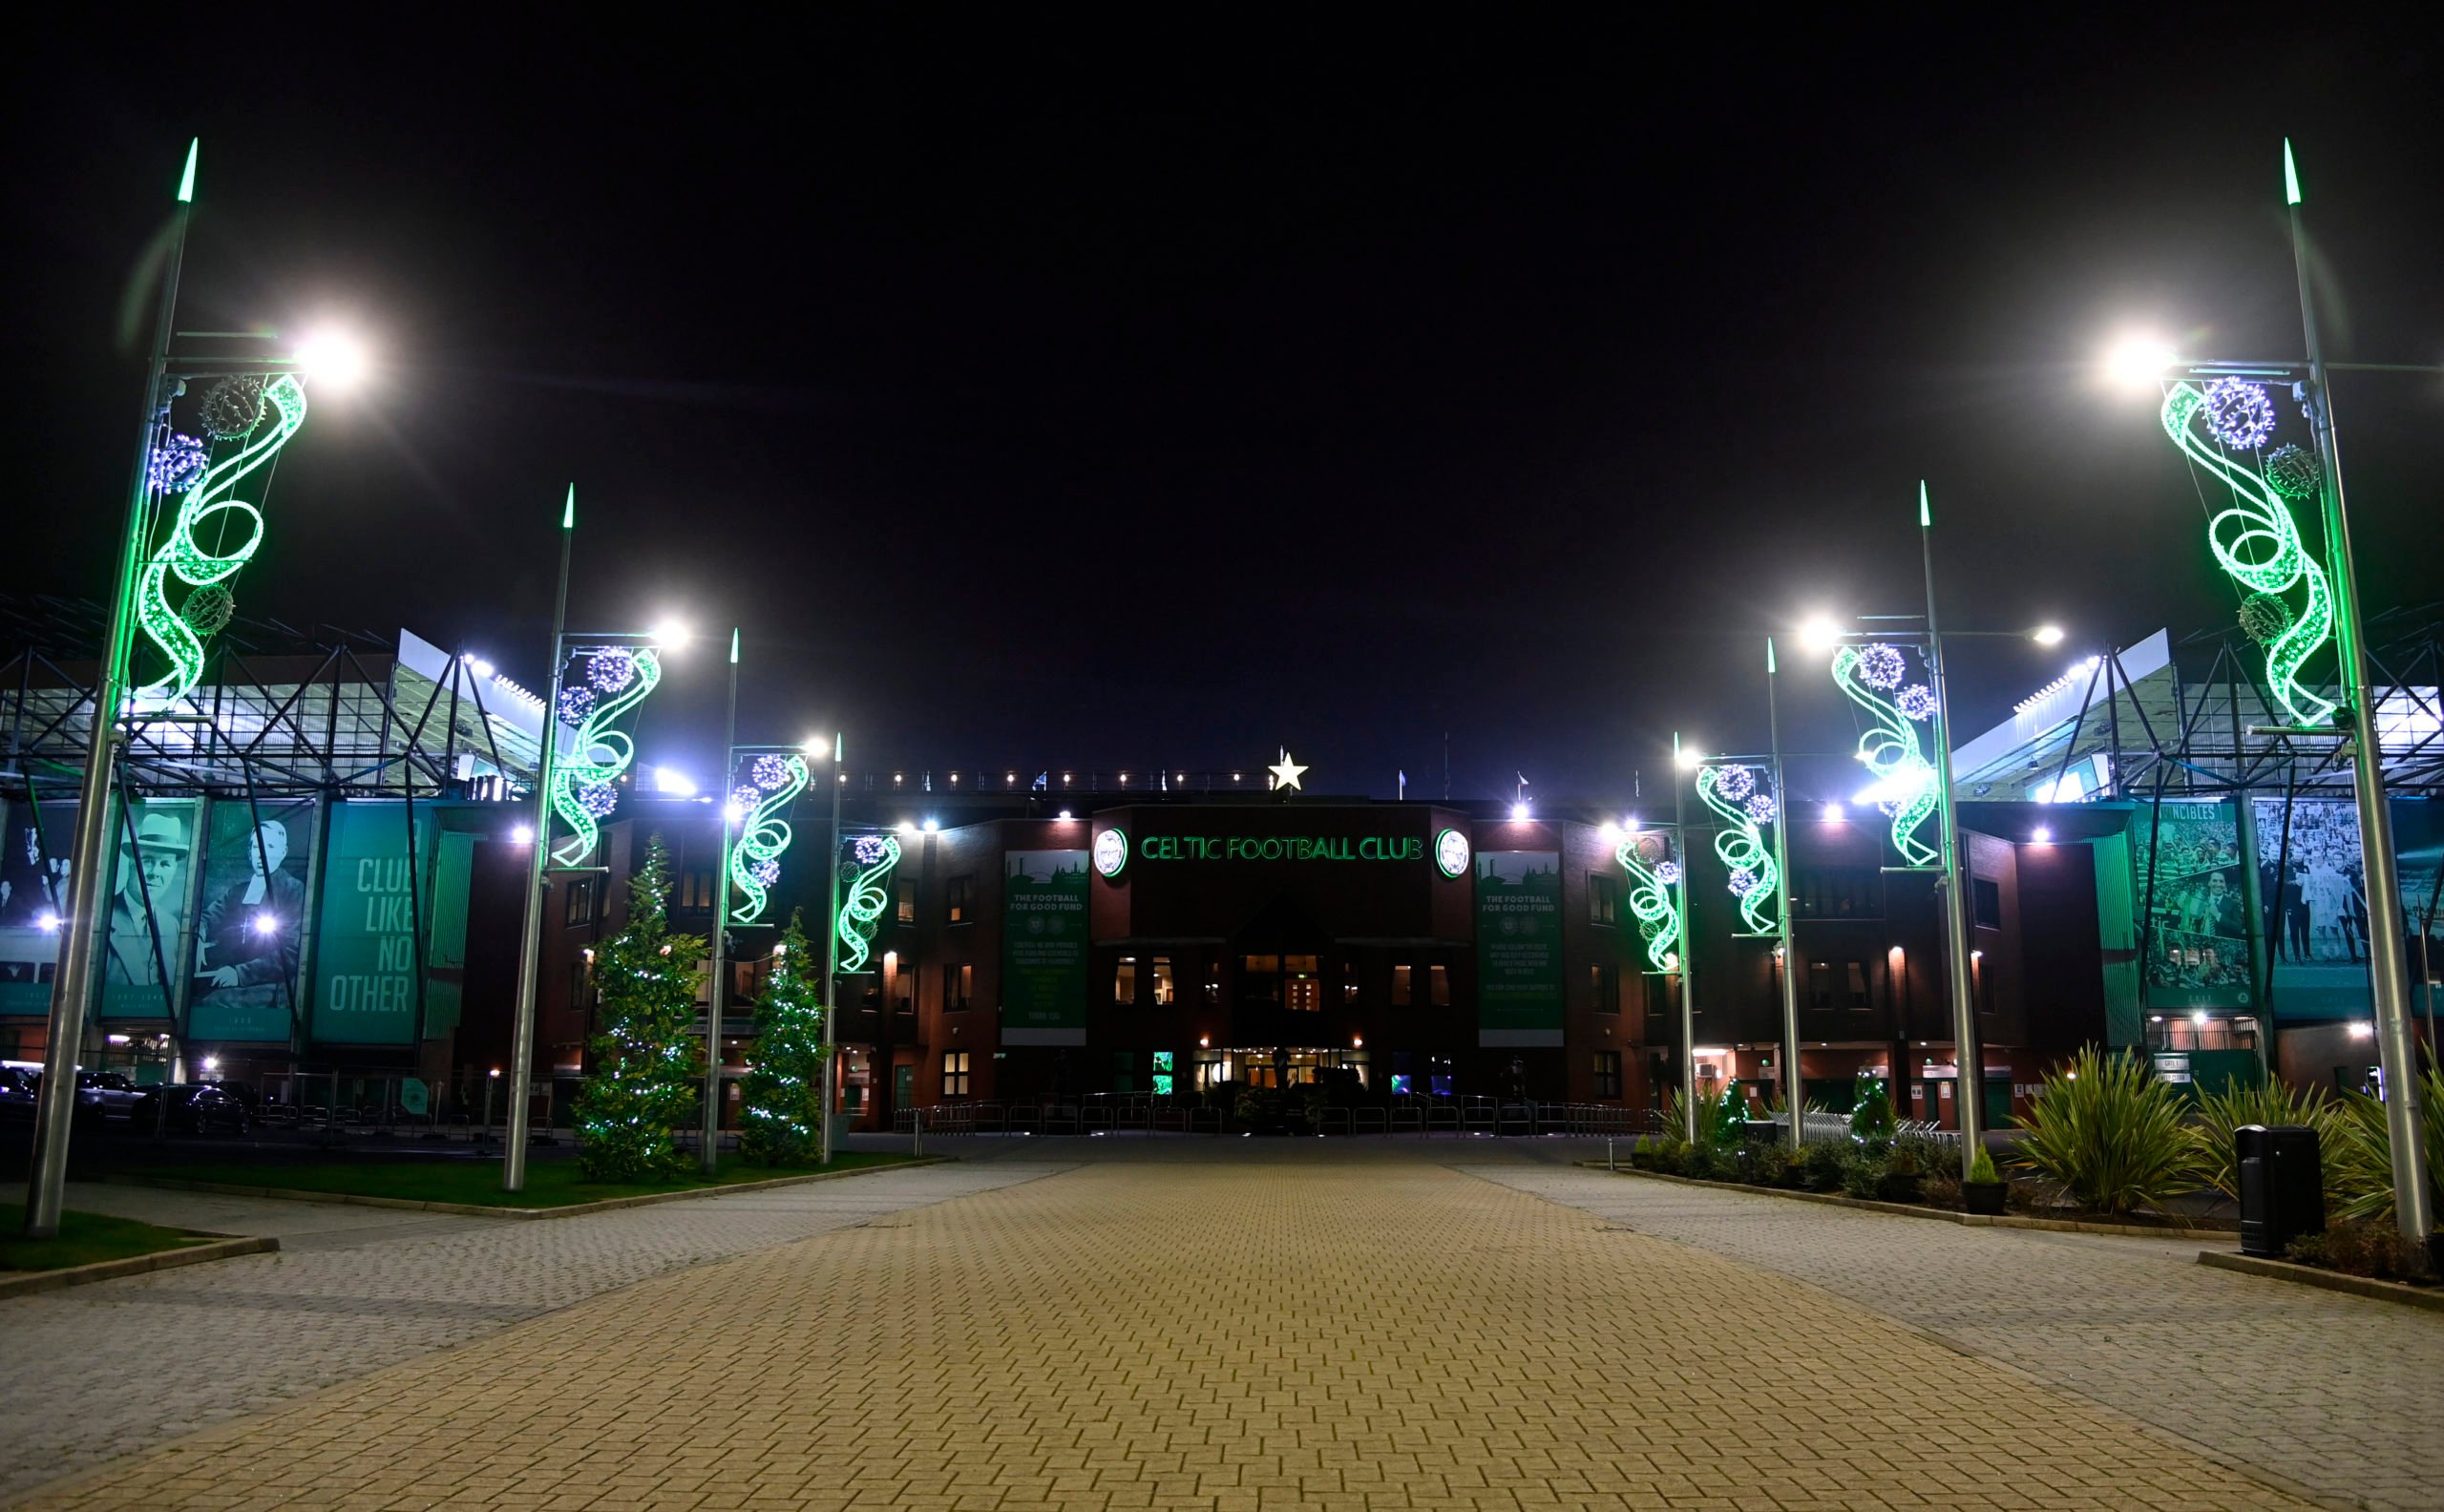 Celtic's pleas to supporters to cancel Sunday protest likely to fall on deaf ears